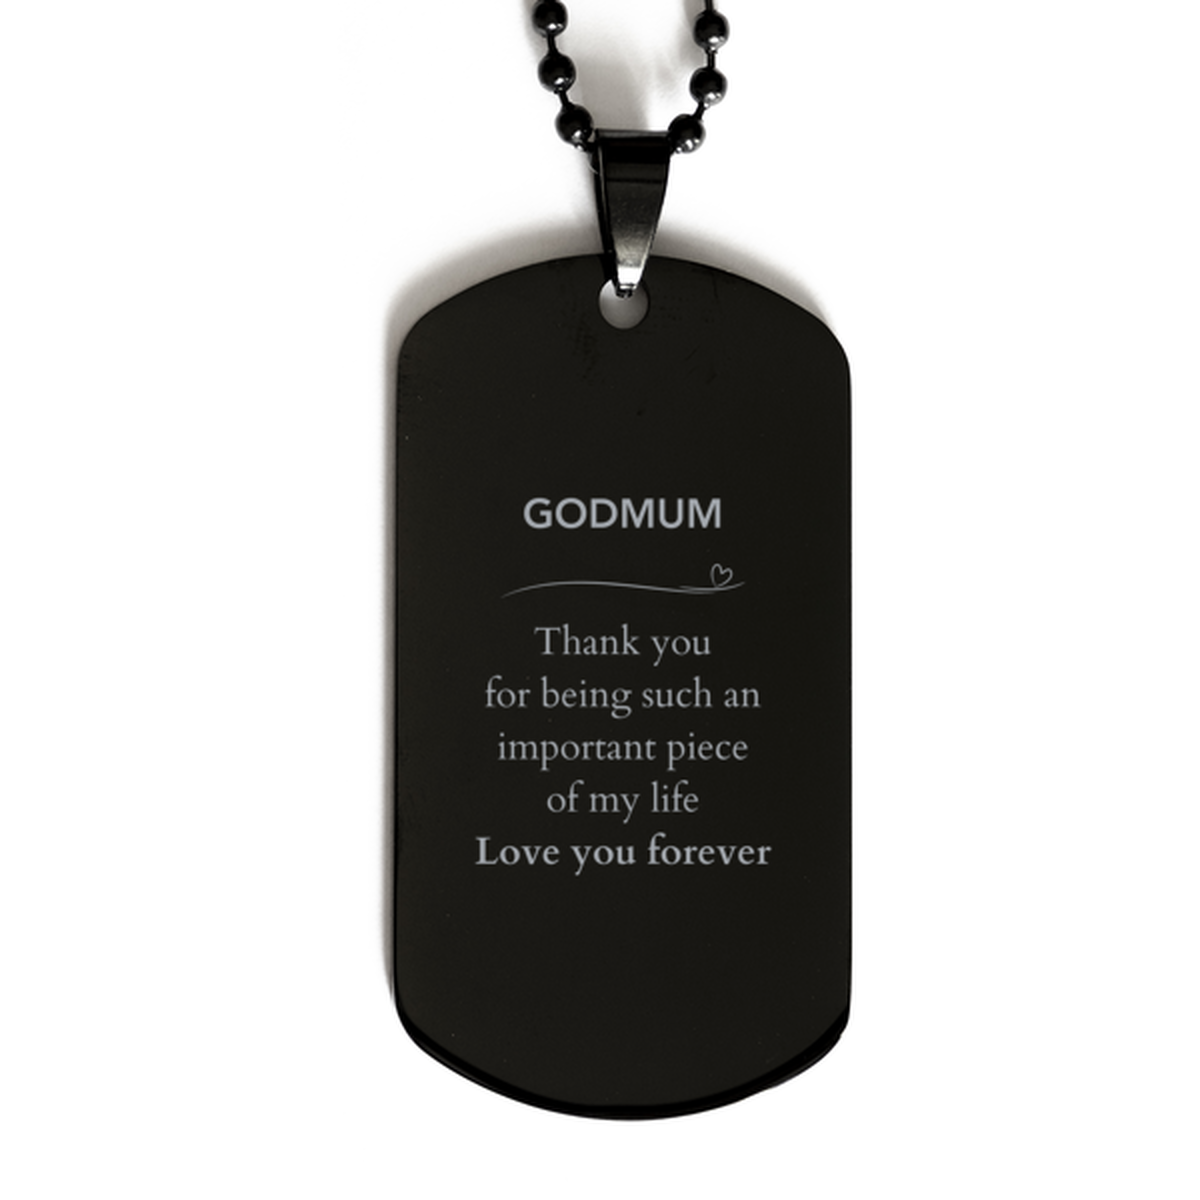 Appropriate Godmum Black Dog Tag Epic Birthday Gifts for Godmum Thank you for being such an important piece of my life Godmum Christmas Mothers Fathers Day